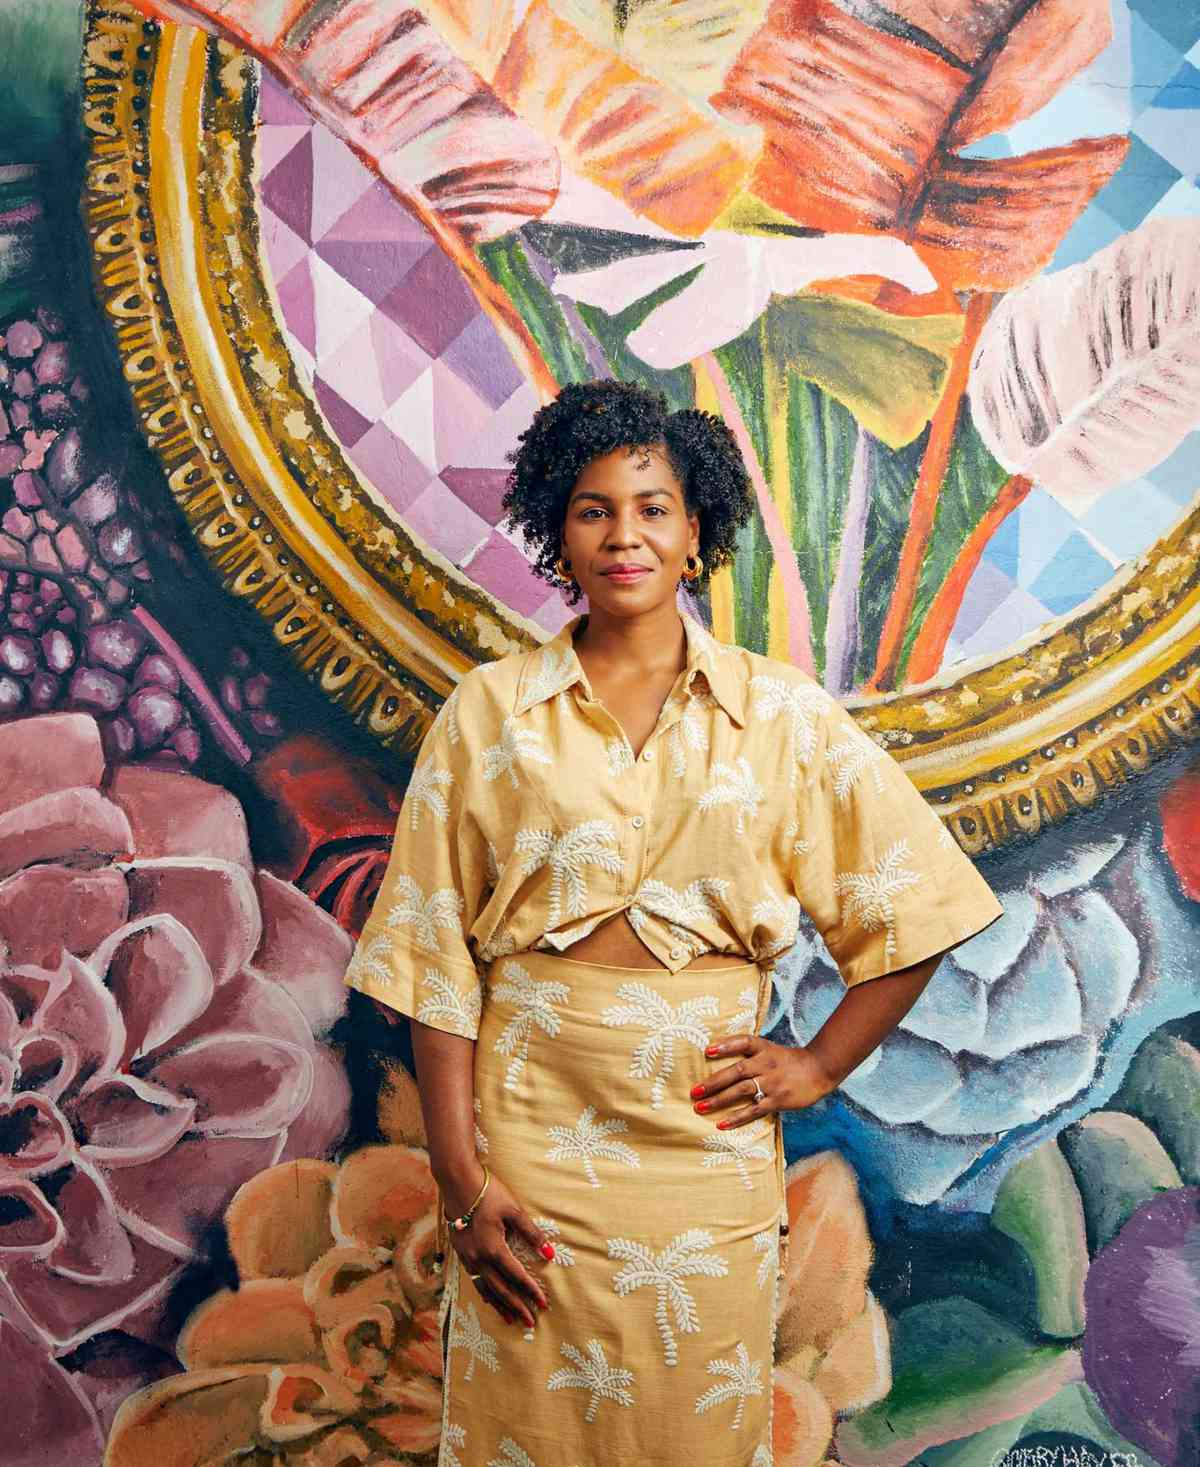 Hotelier Jamila Ross wears a palm print top and skirt in front of a color mural at her hotel, the Copper Door B&B, in Miami